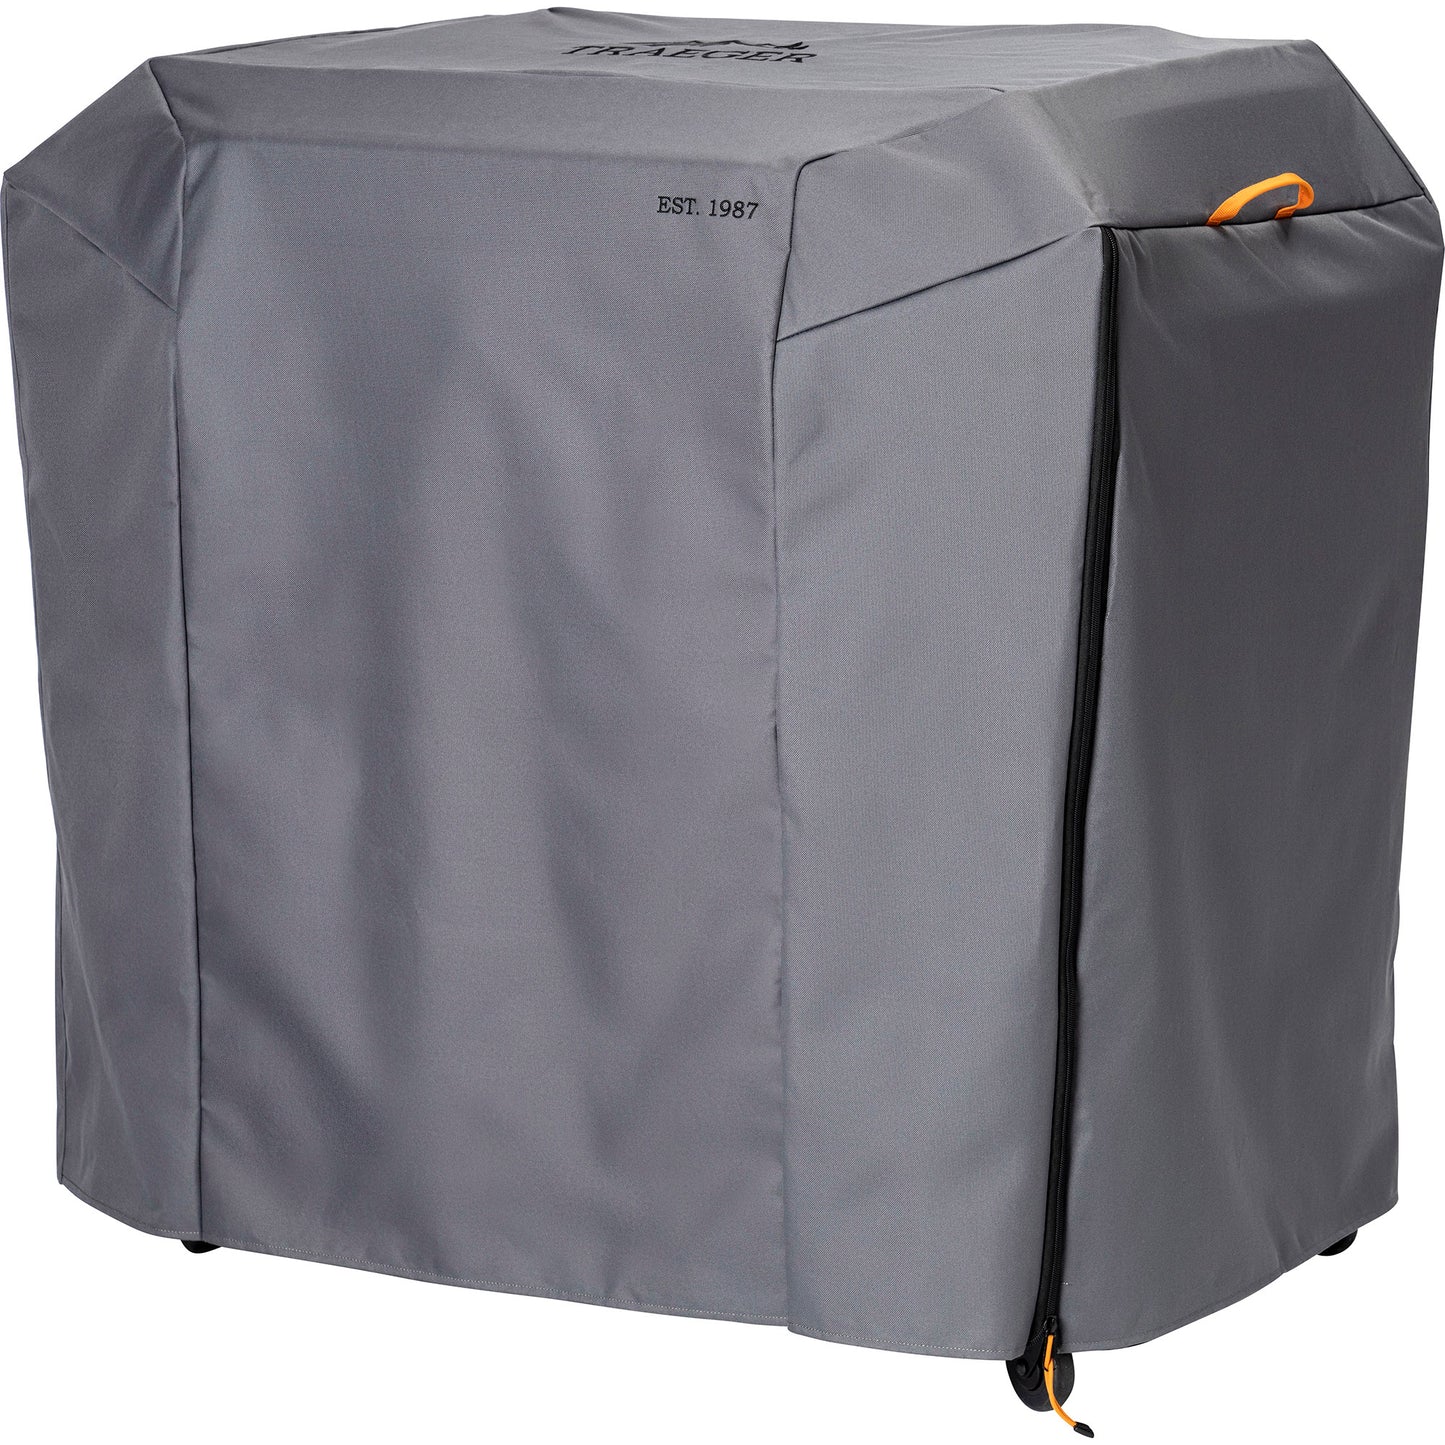 Traeger grill covers - Full length - Select your size